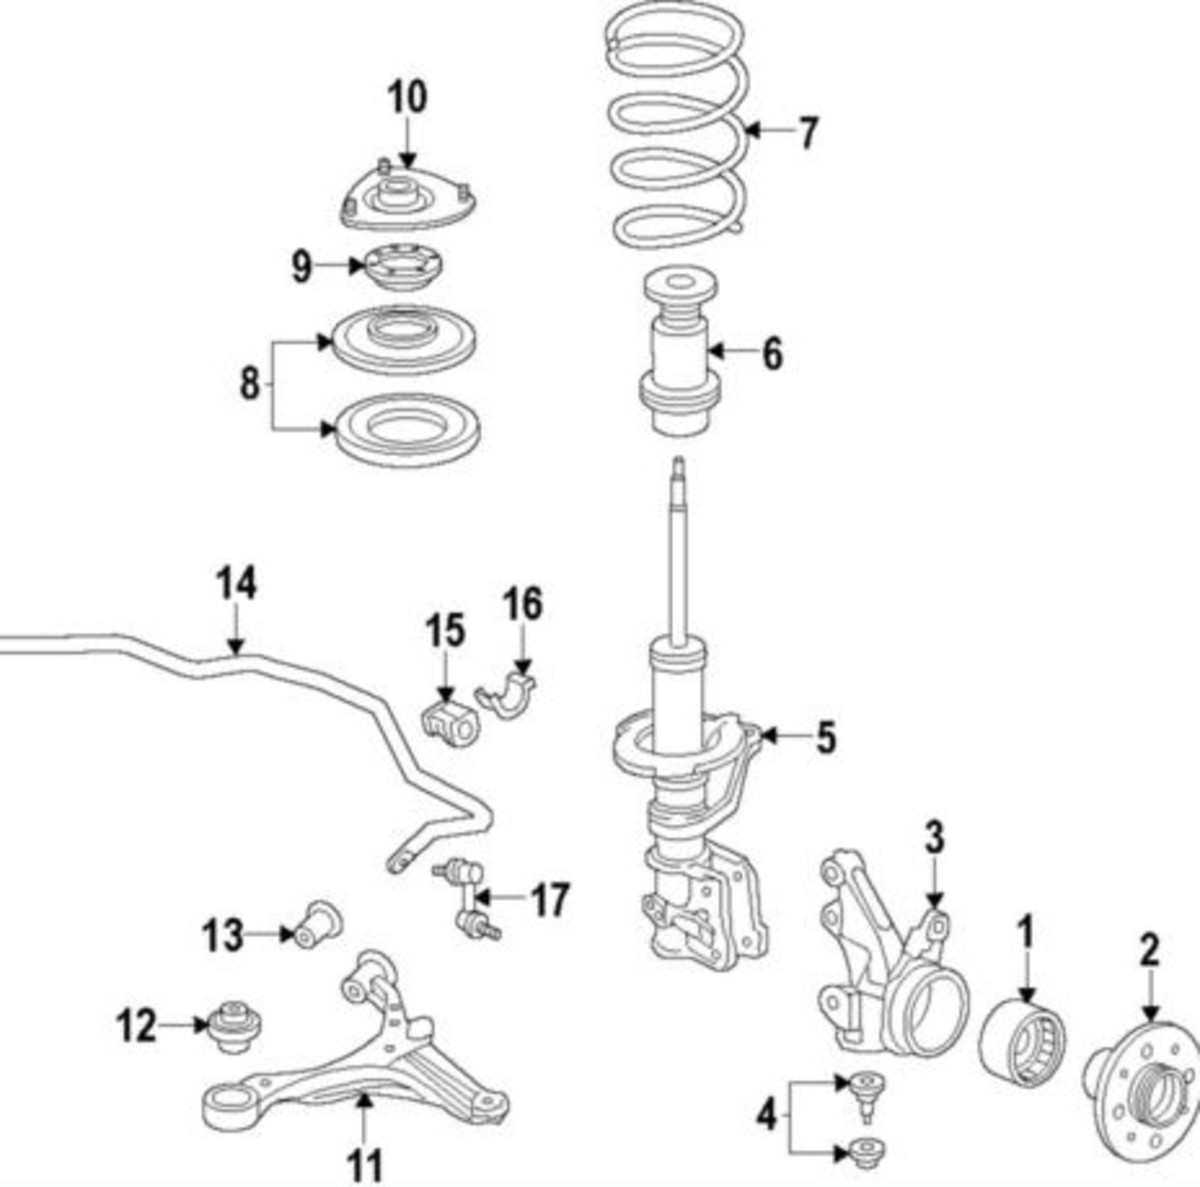 '01 - '05 Honda Civic Front Suspension Diagram.  Item 4 is the ball joint.